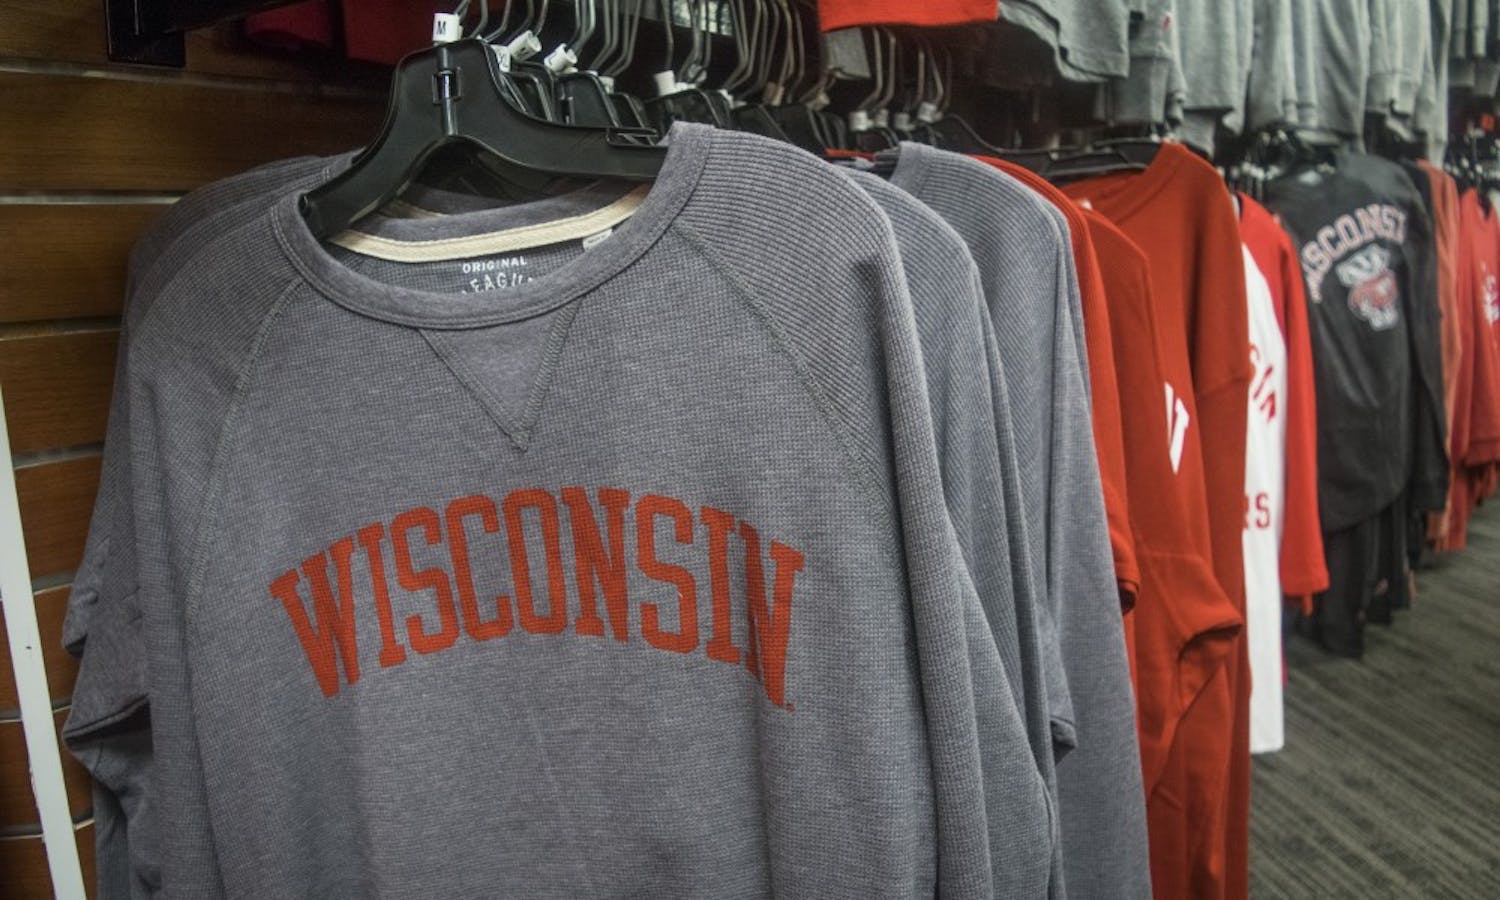 If the Senate version of the GOP tax bill becomes law, UW-Madison’s scholarship funds could take a hit.